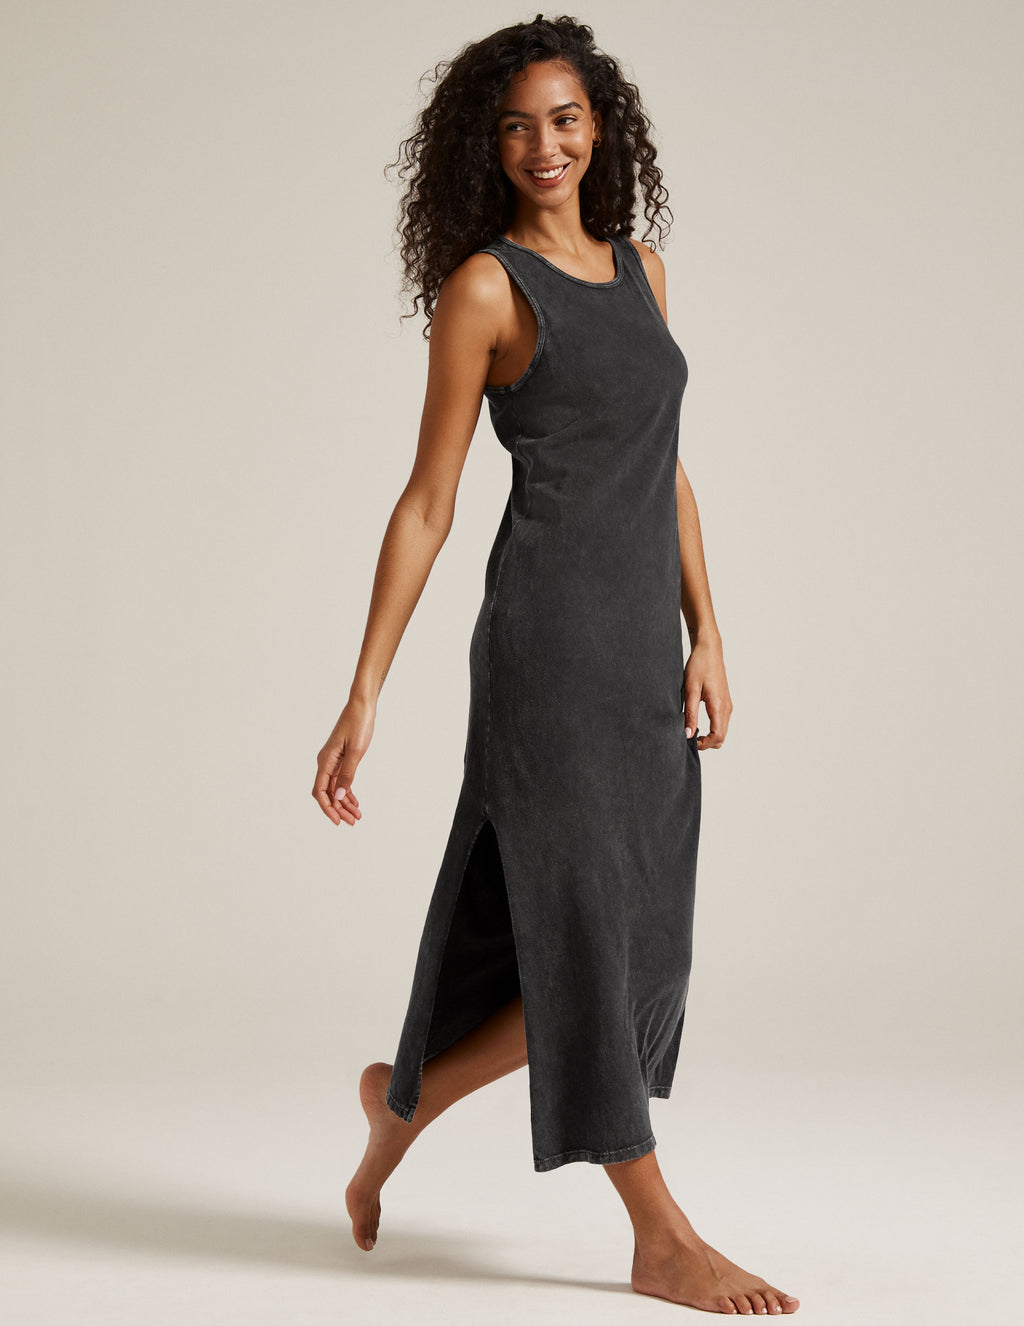 Sporty, Athletic & Active Dresses – Beyond Yoga